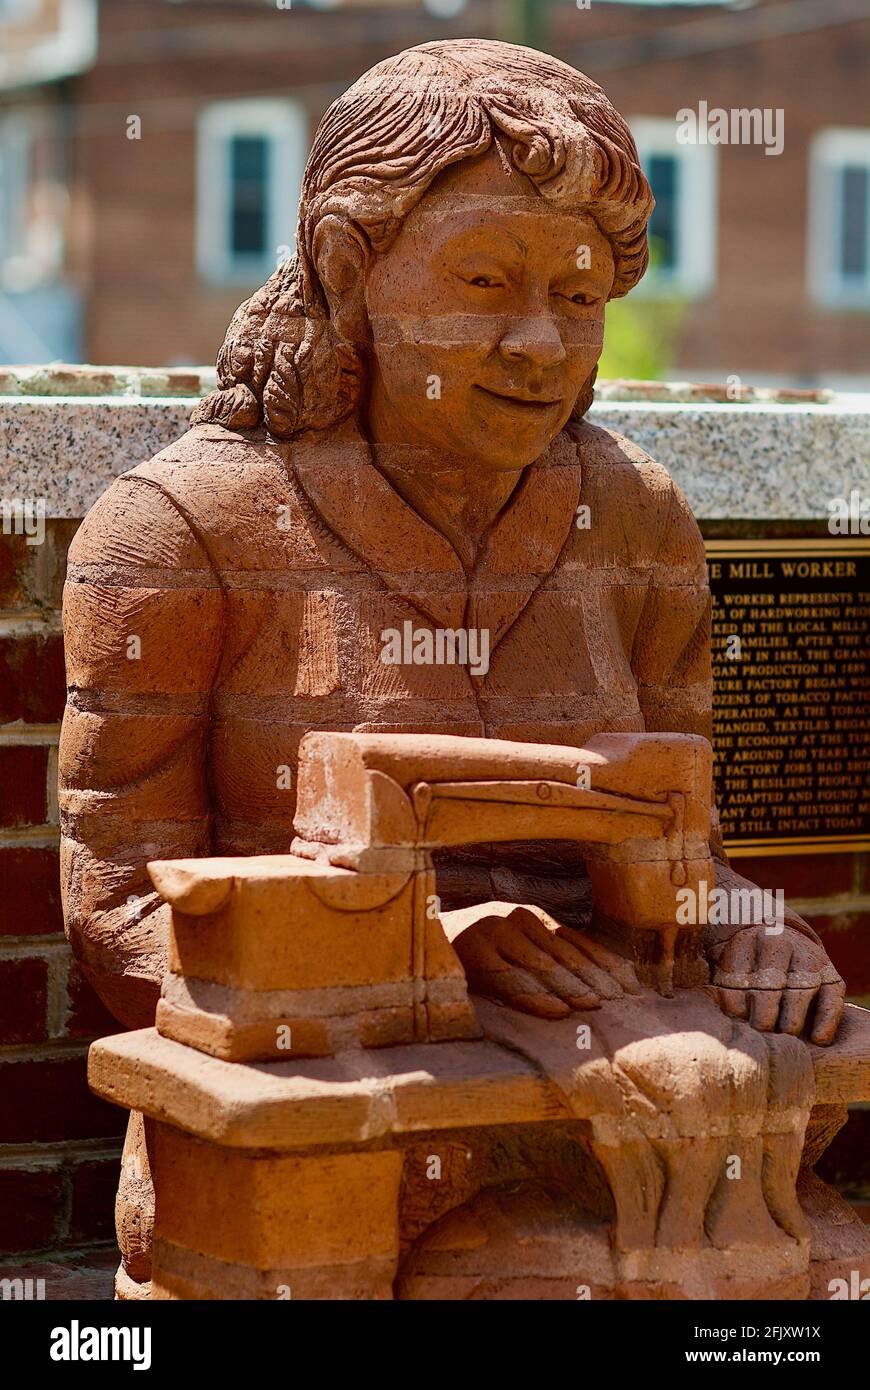 Mount Airy, North Carolina, USA - July 5, 2020: 'The Mill Worker' by artist Brad Spencer is part of 'The Whittling Wall' sculpture in Mount Airy. Stock Photo